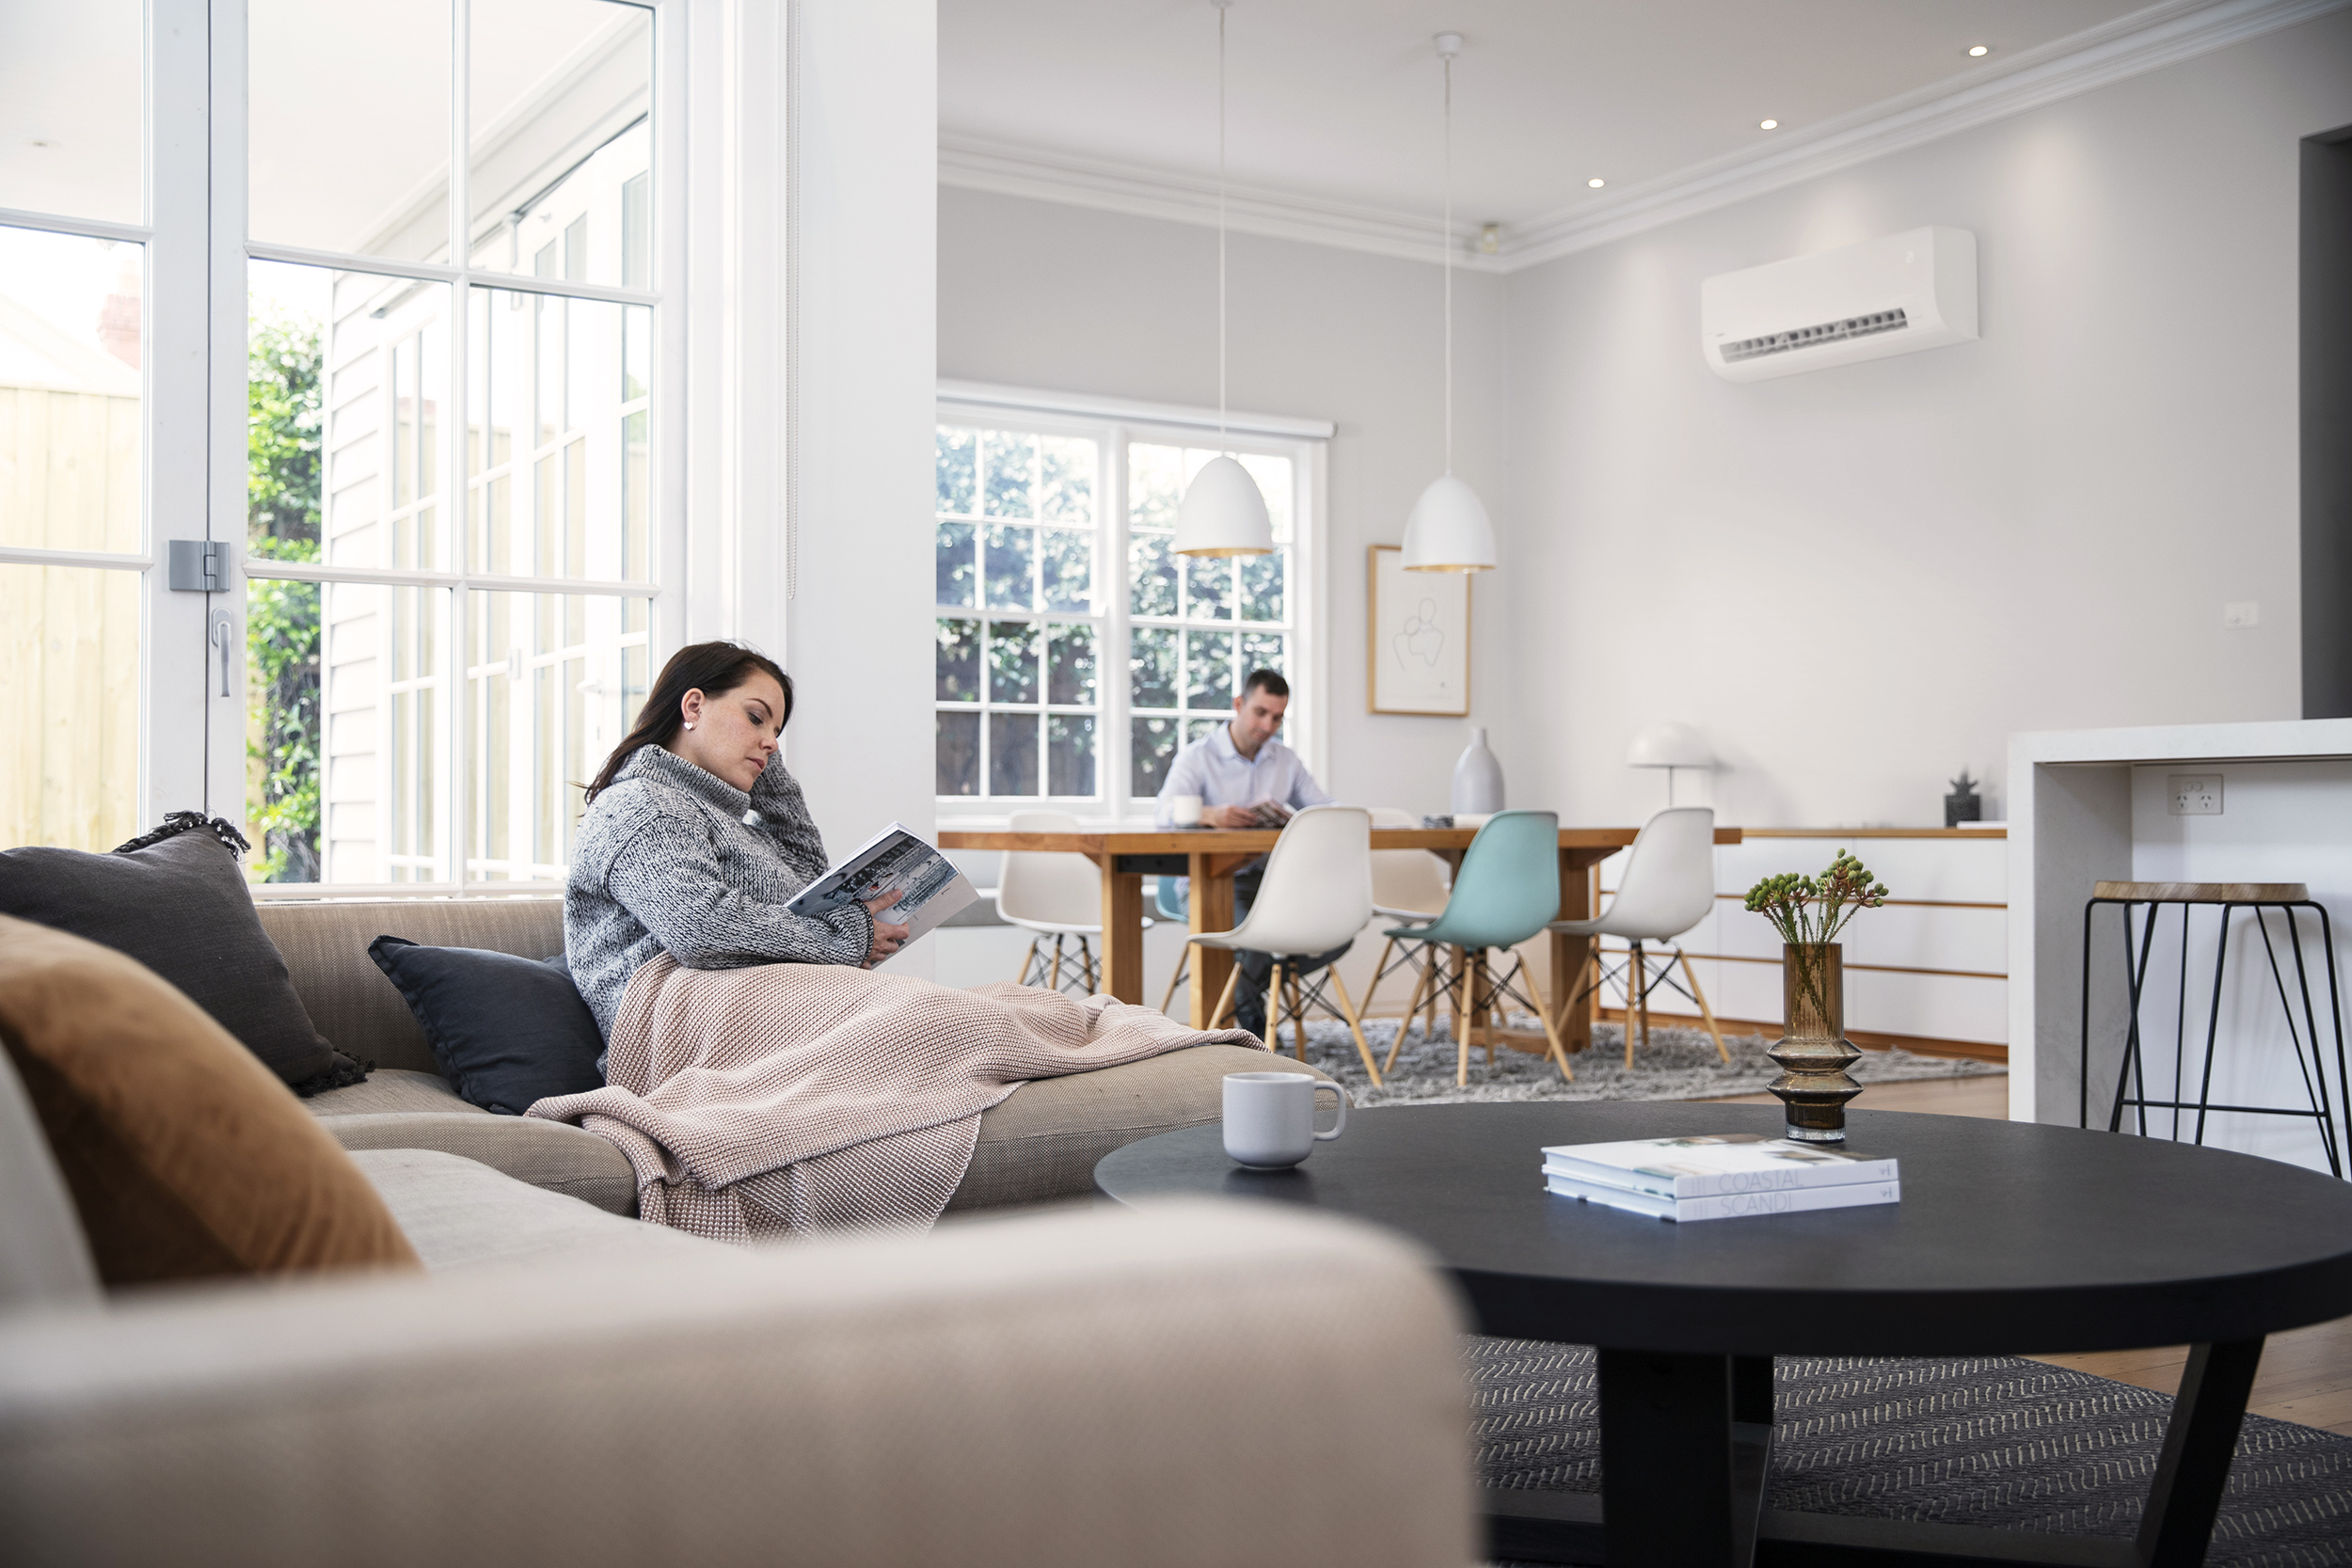 Campaign-thom-rigney-professional-photographer-advertising-commissioned-lifestyle-australia-heating-airconditioning-002